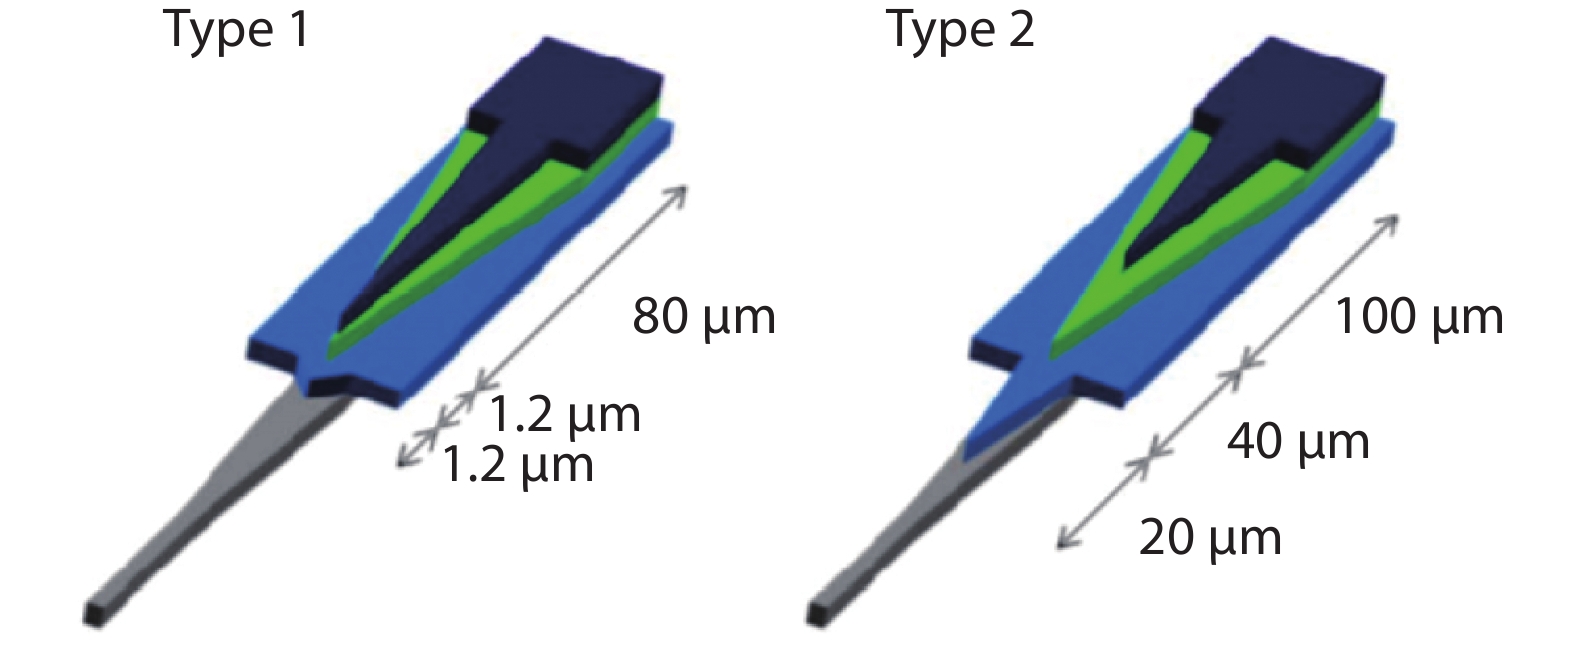 (Color online) Schematic of mode conversion tapers for coupling light into the silicon waveguide. The silicon waveguide is in gray while different sections of the top III –V layer with different taper lengths are shown in other colors[22].